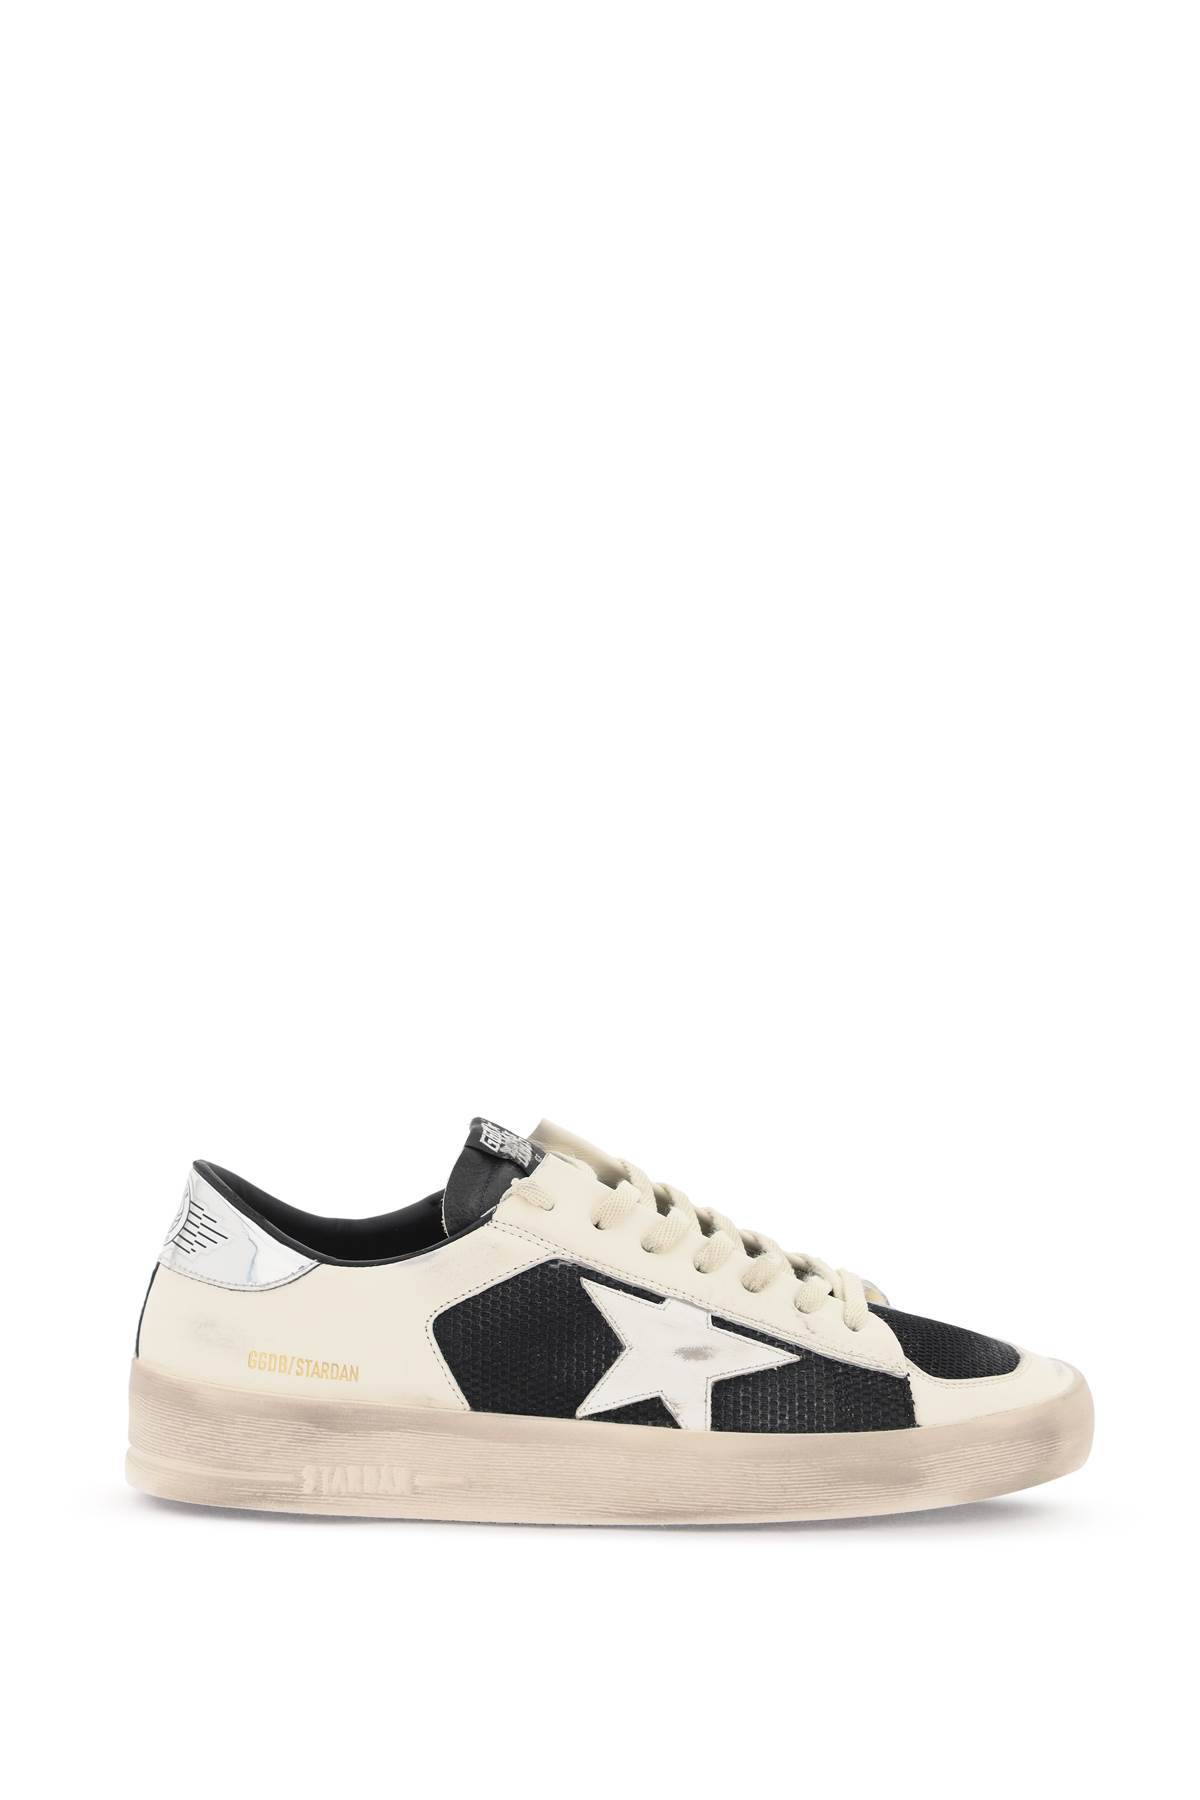 Shop Golden Goose Mesh And Leather Stardan Sneakers In Black,white